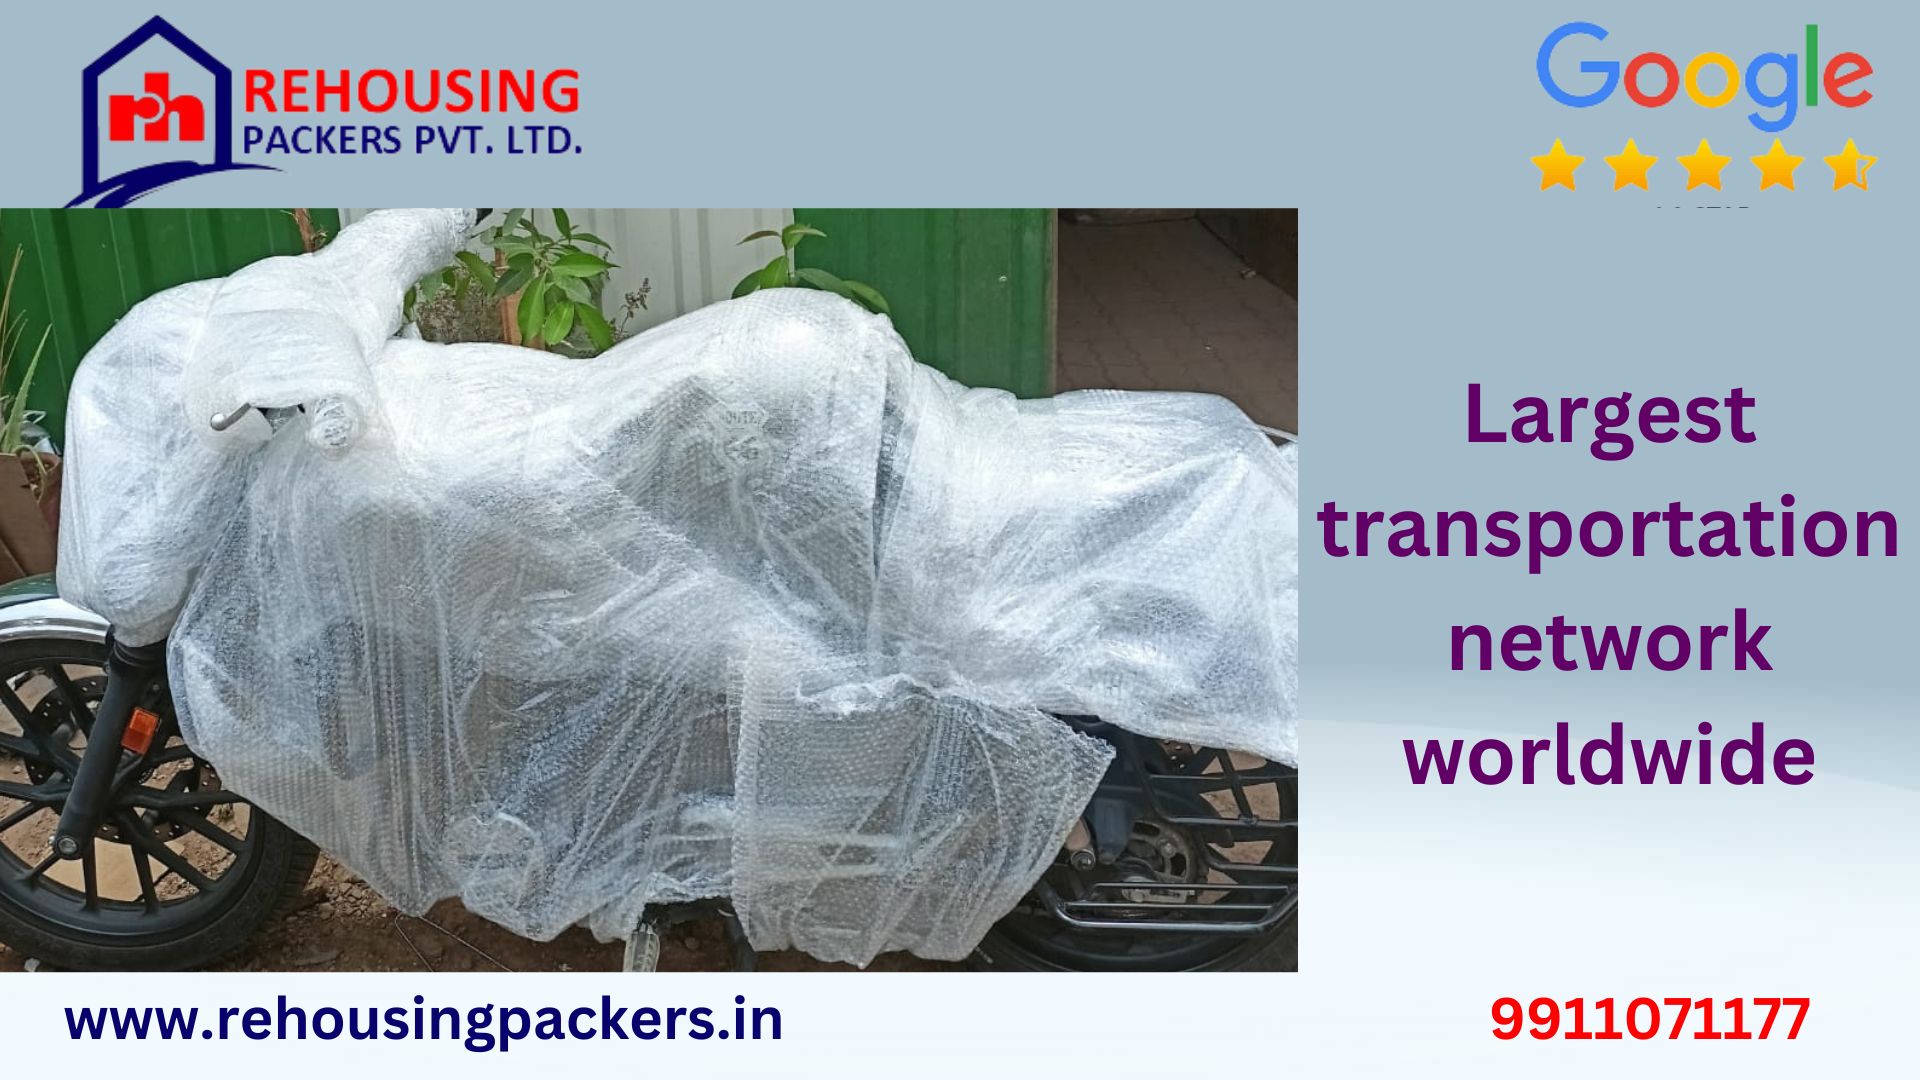 A bike carrier is a better option for transportation in a city like Bangalore